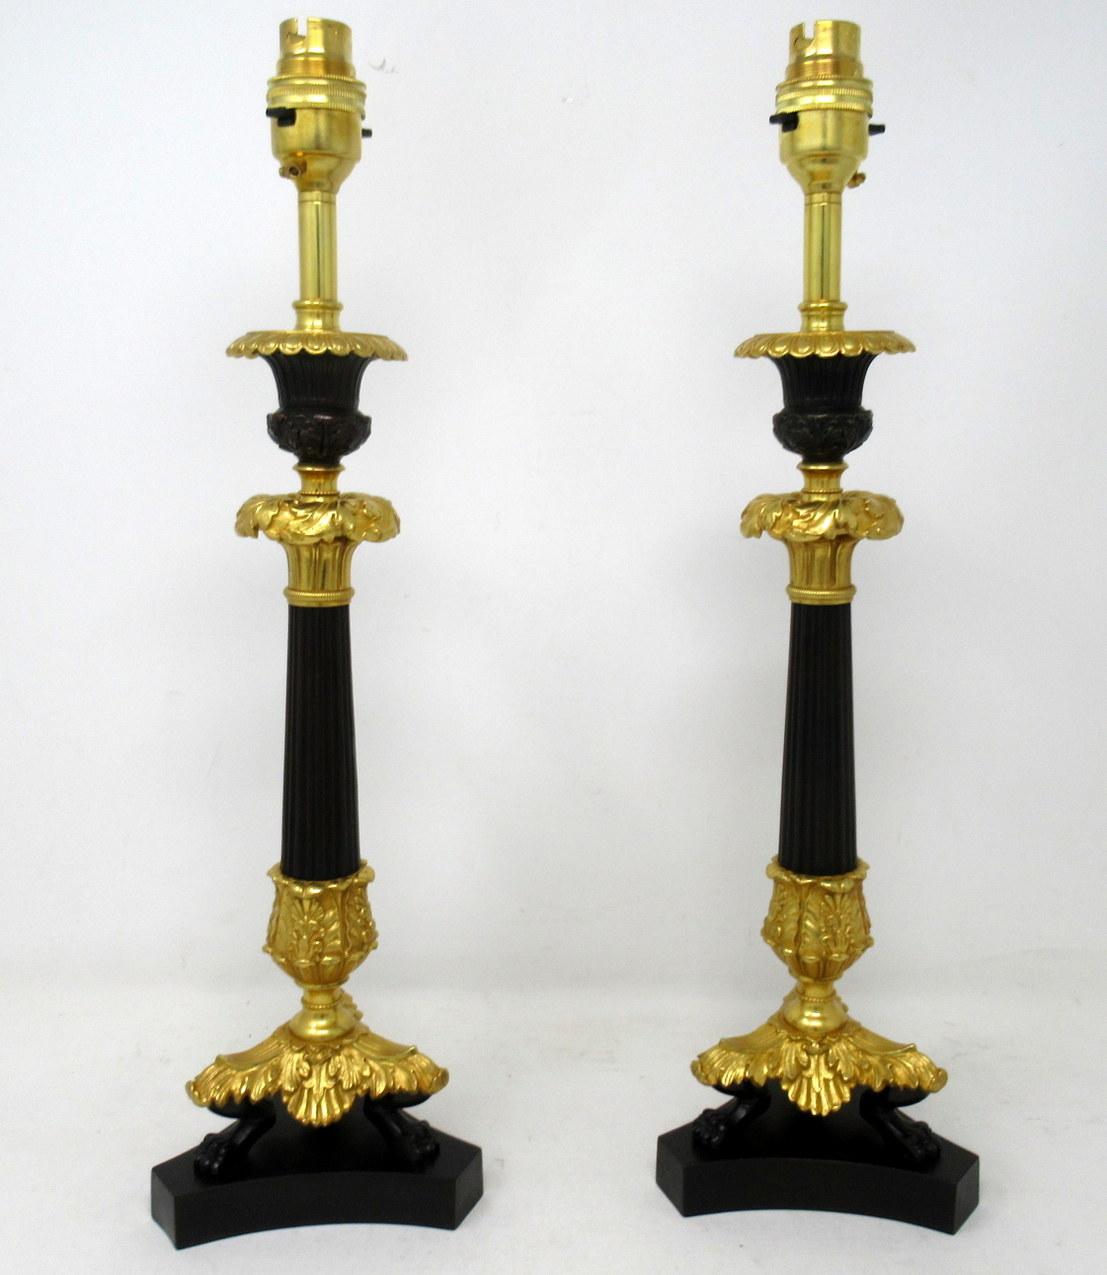 Early Victorian Antique French Gilt Bronze and Ormolu Corinthian Column Candlestick Lamps Pair